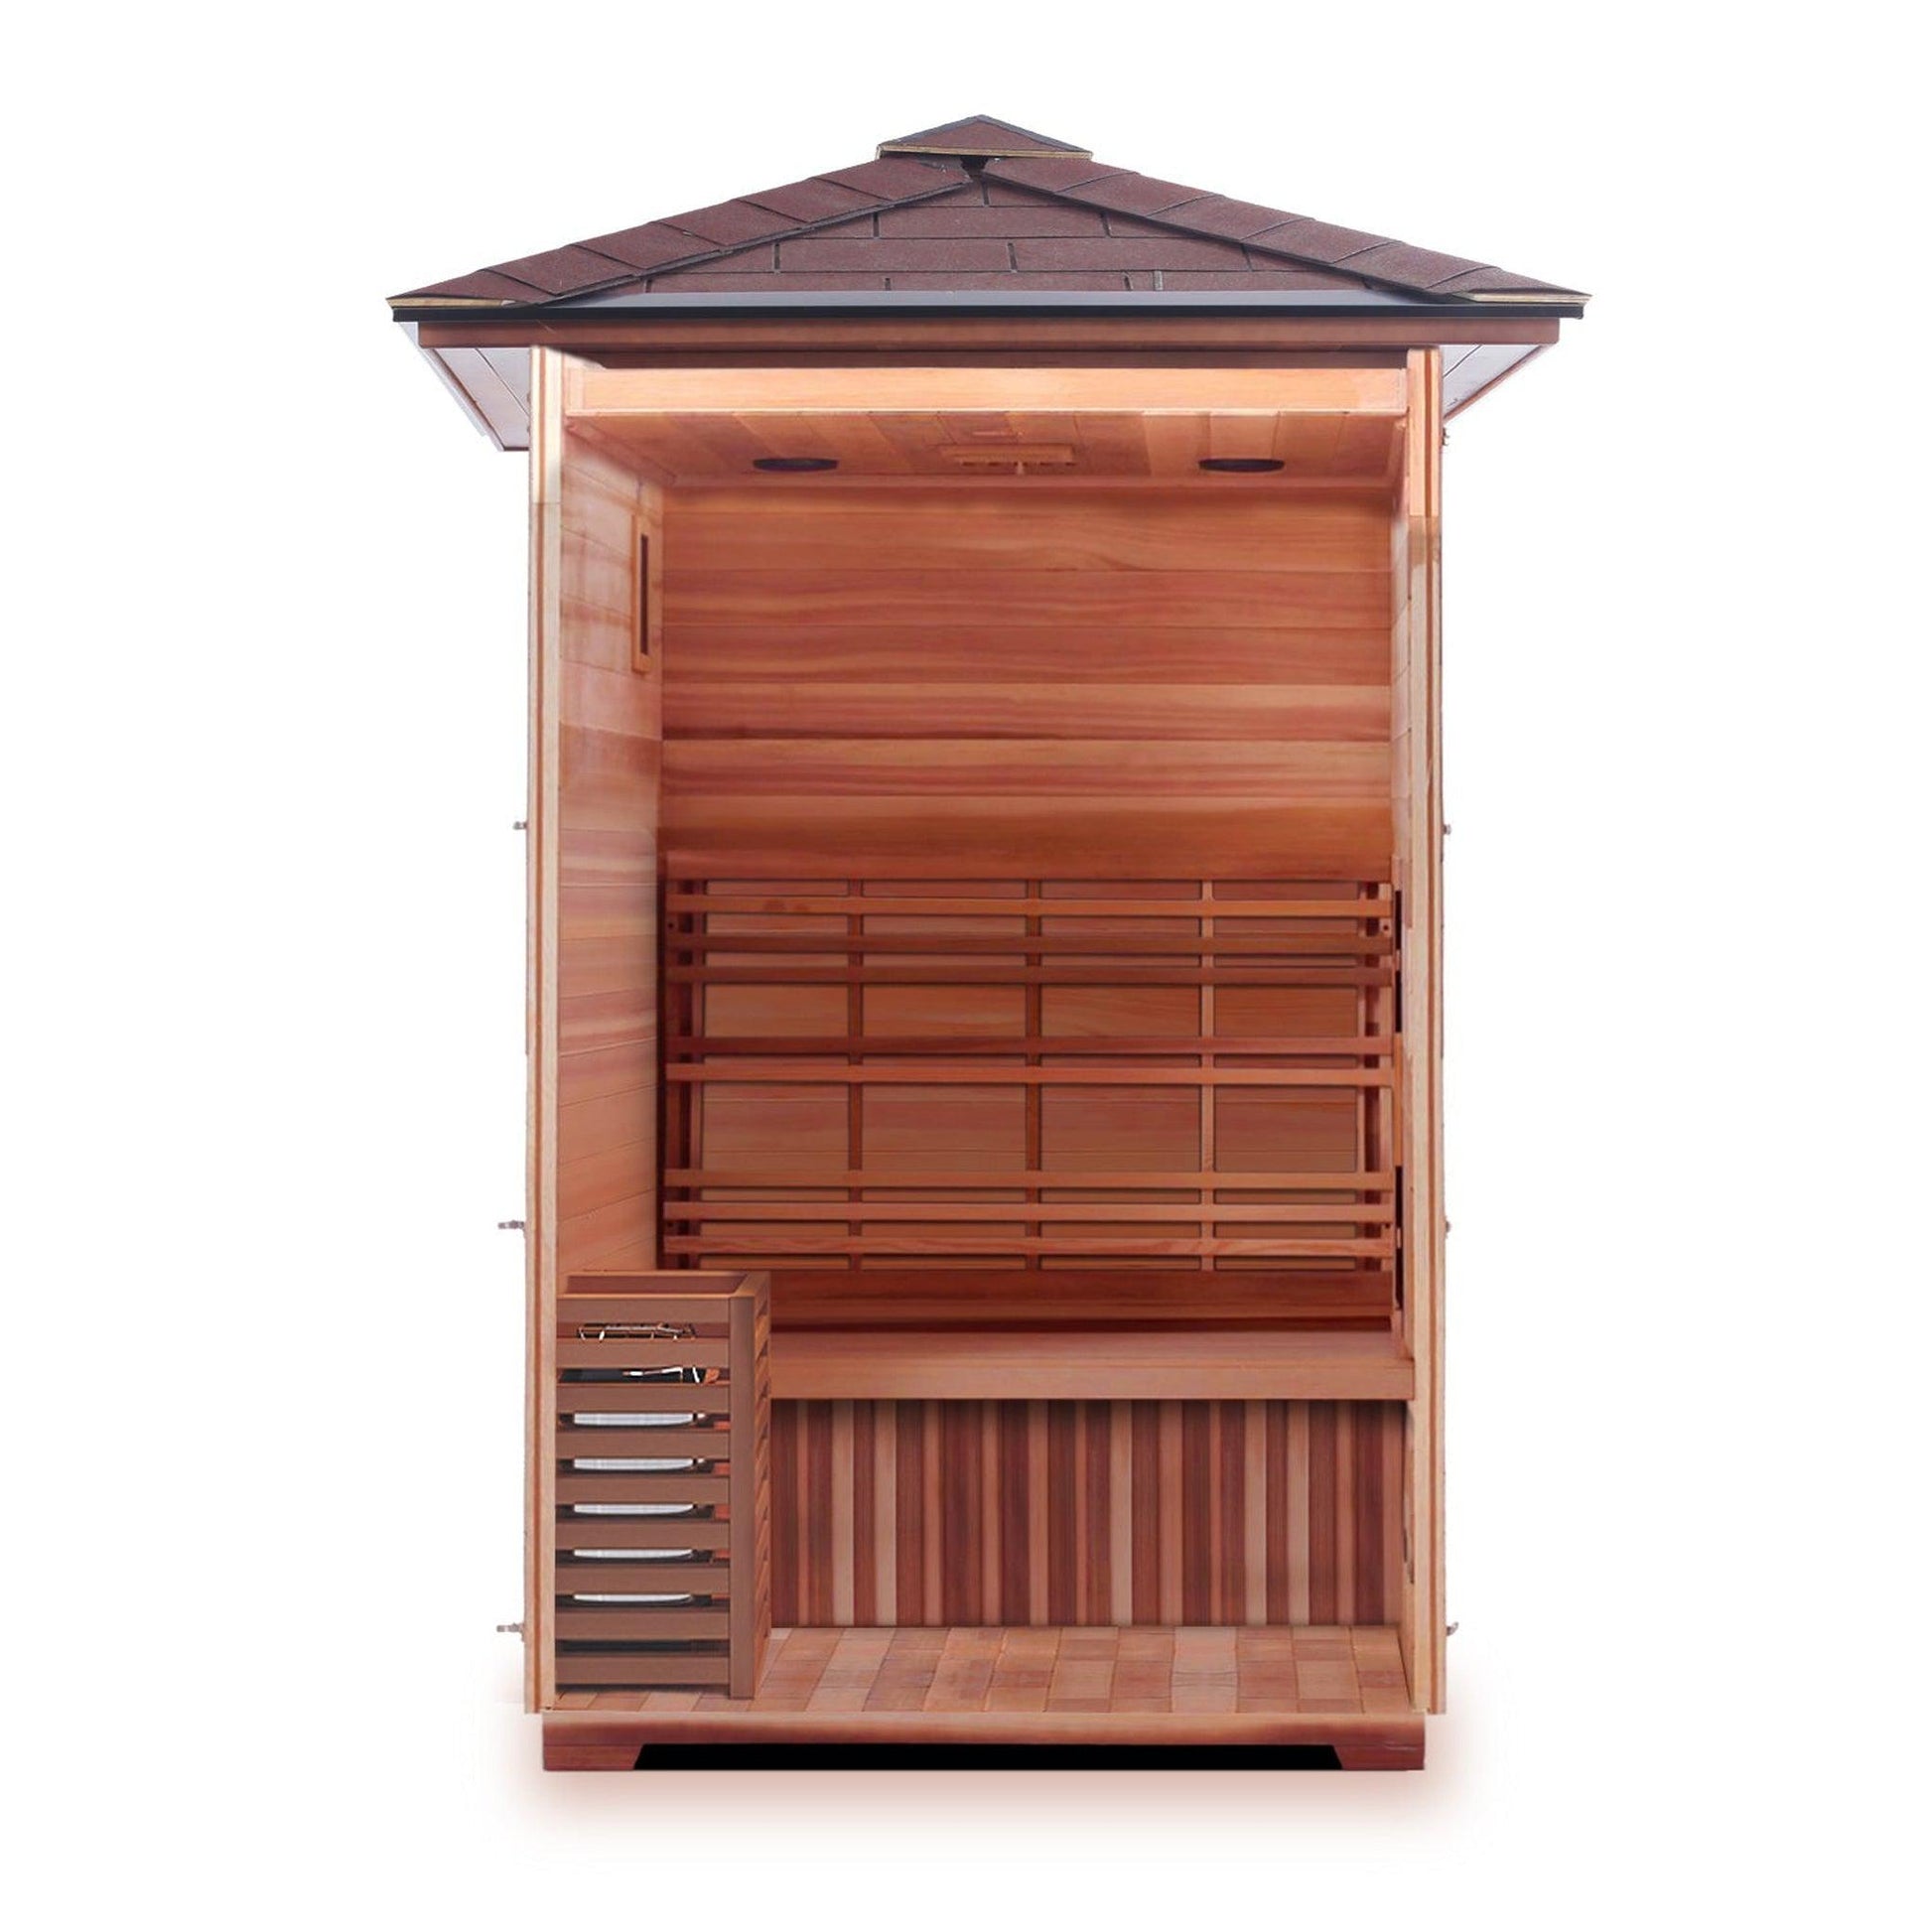 SunRay Eagle 2-Person Outdoor Traditional Sauna In Hemlock Wood With Electric Heater